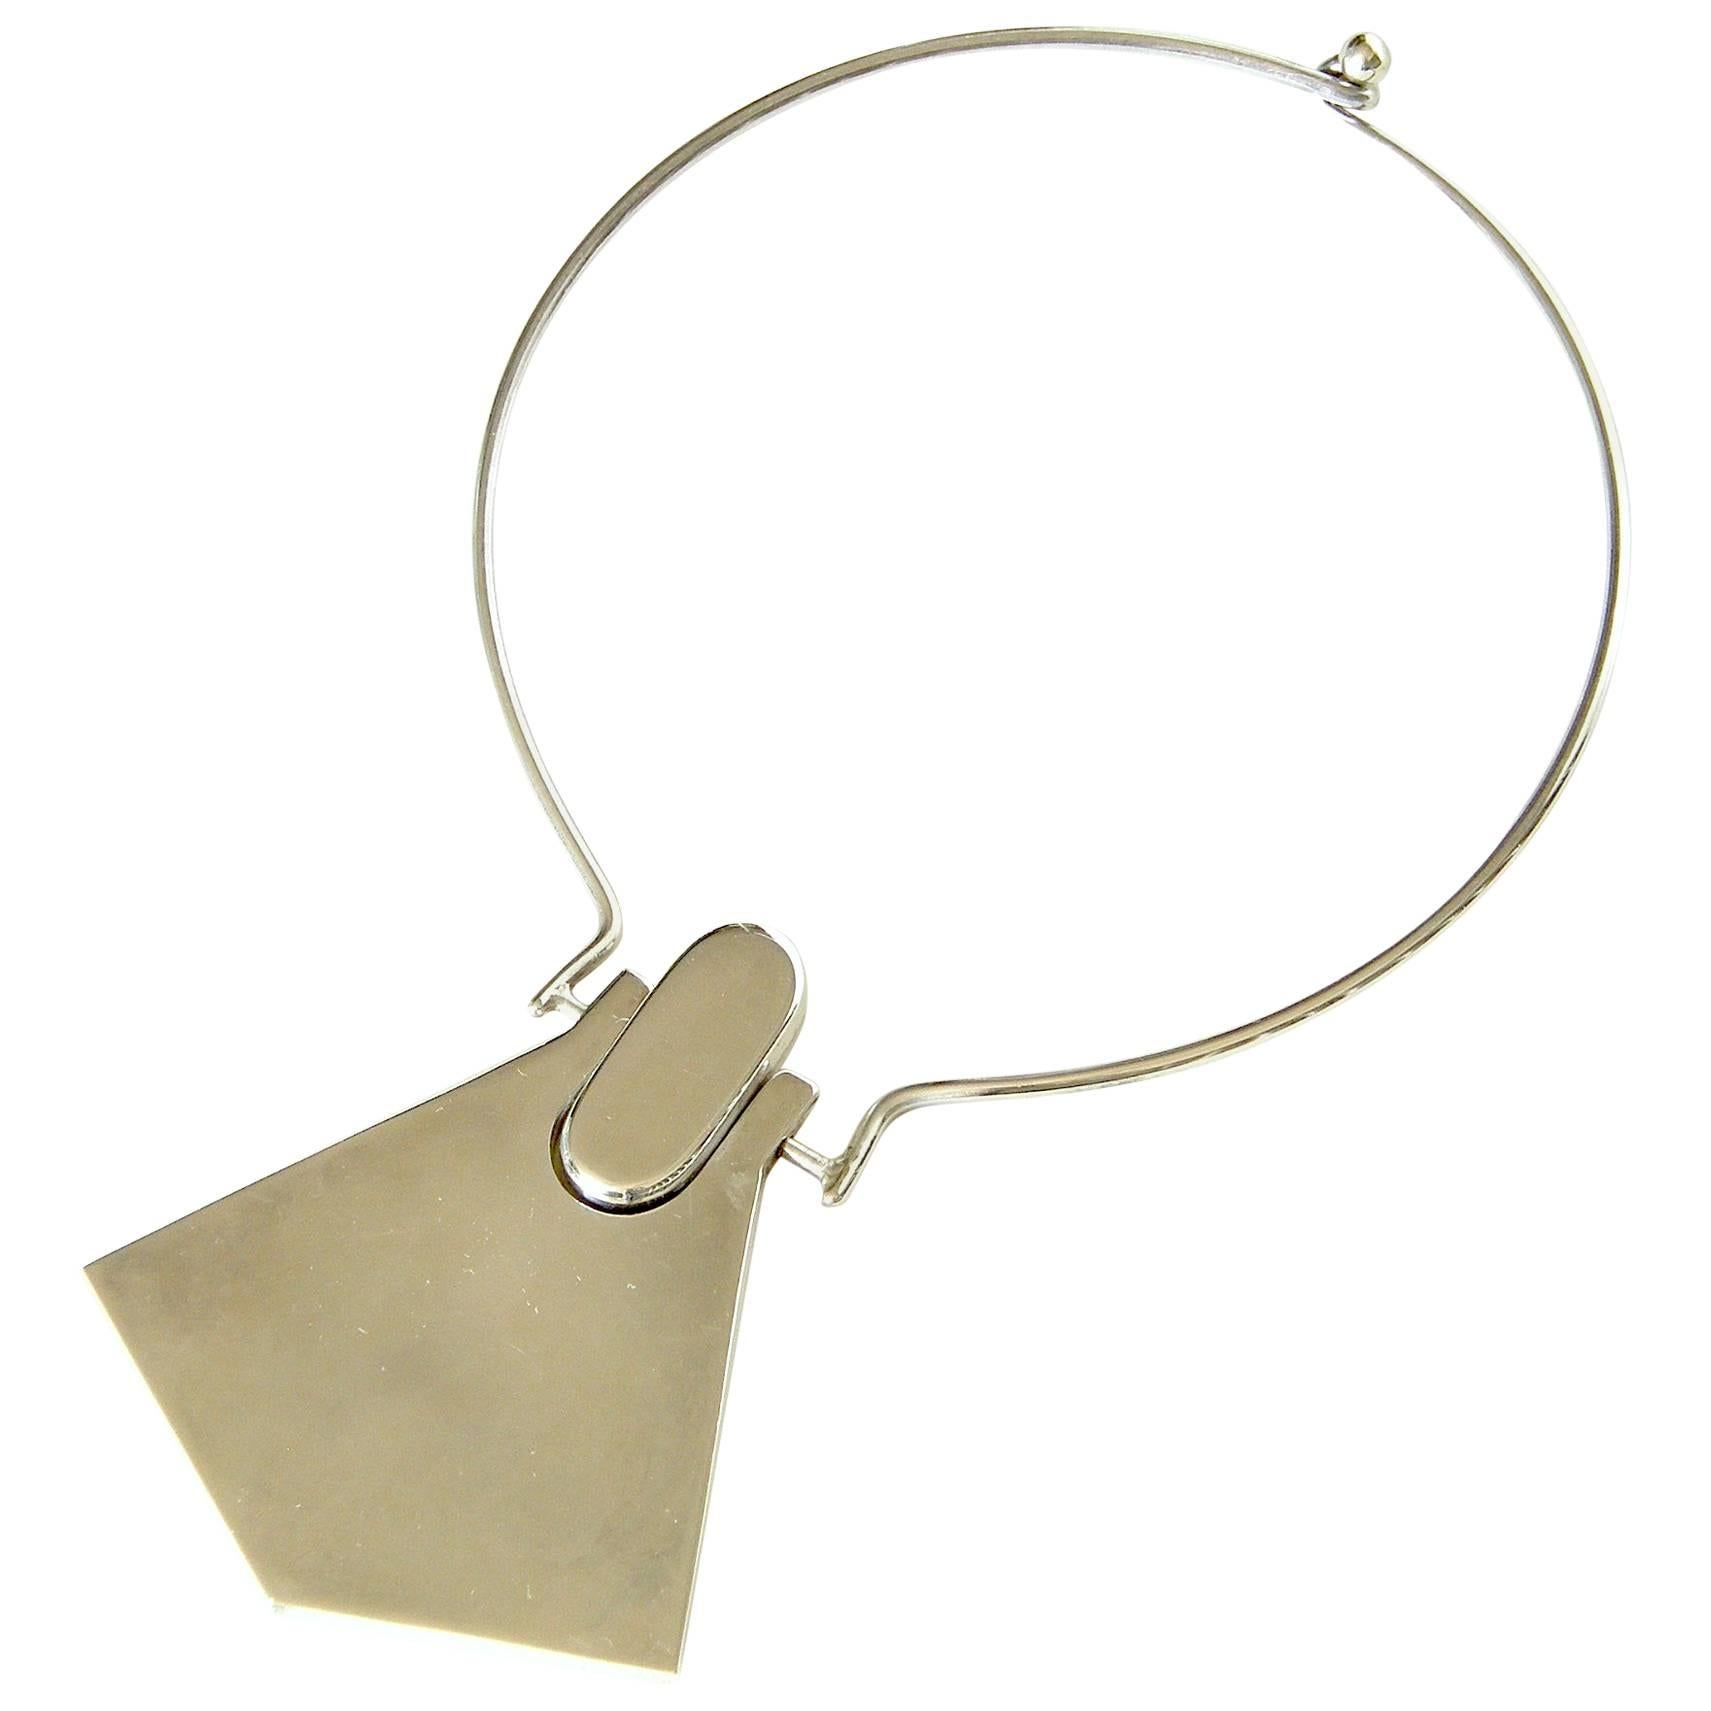 Modernist Sterling Necklace with Geometric Pendant